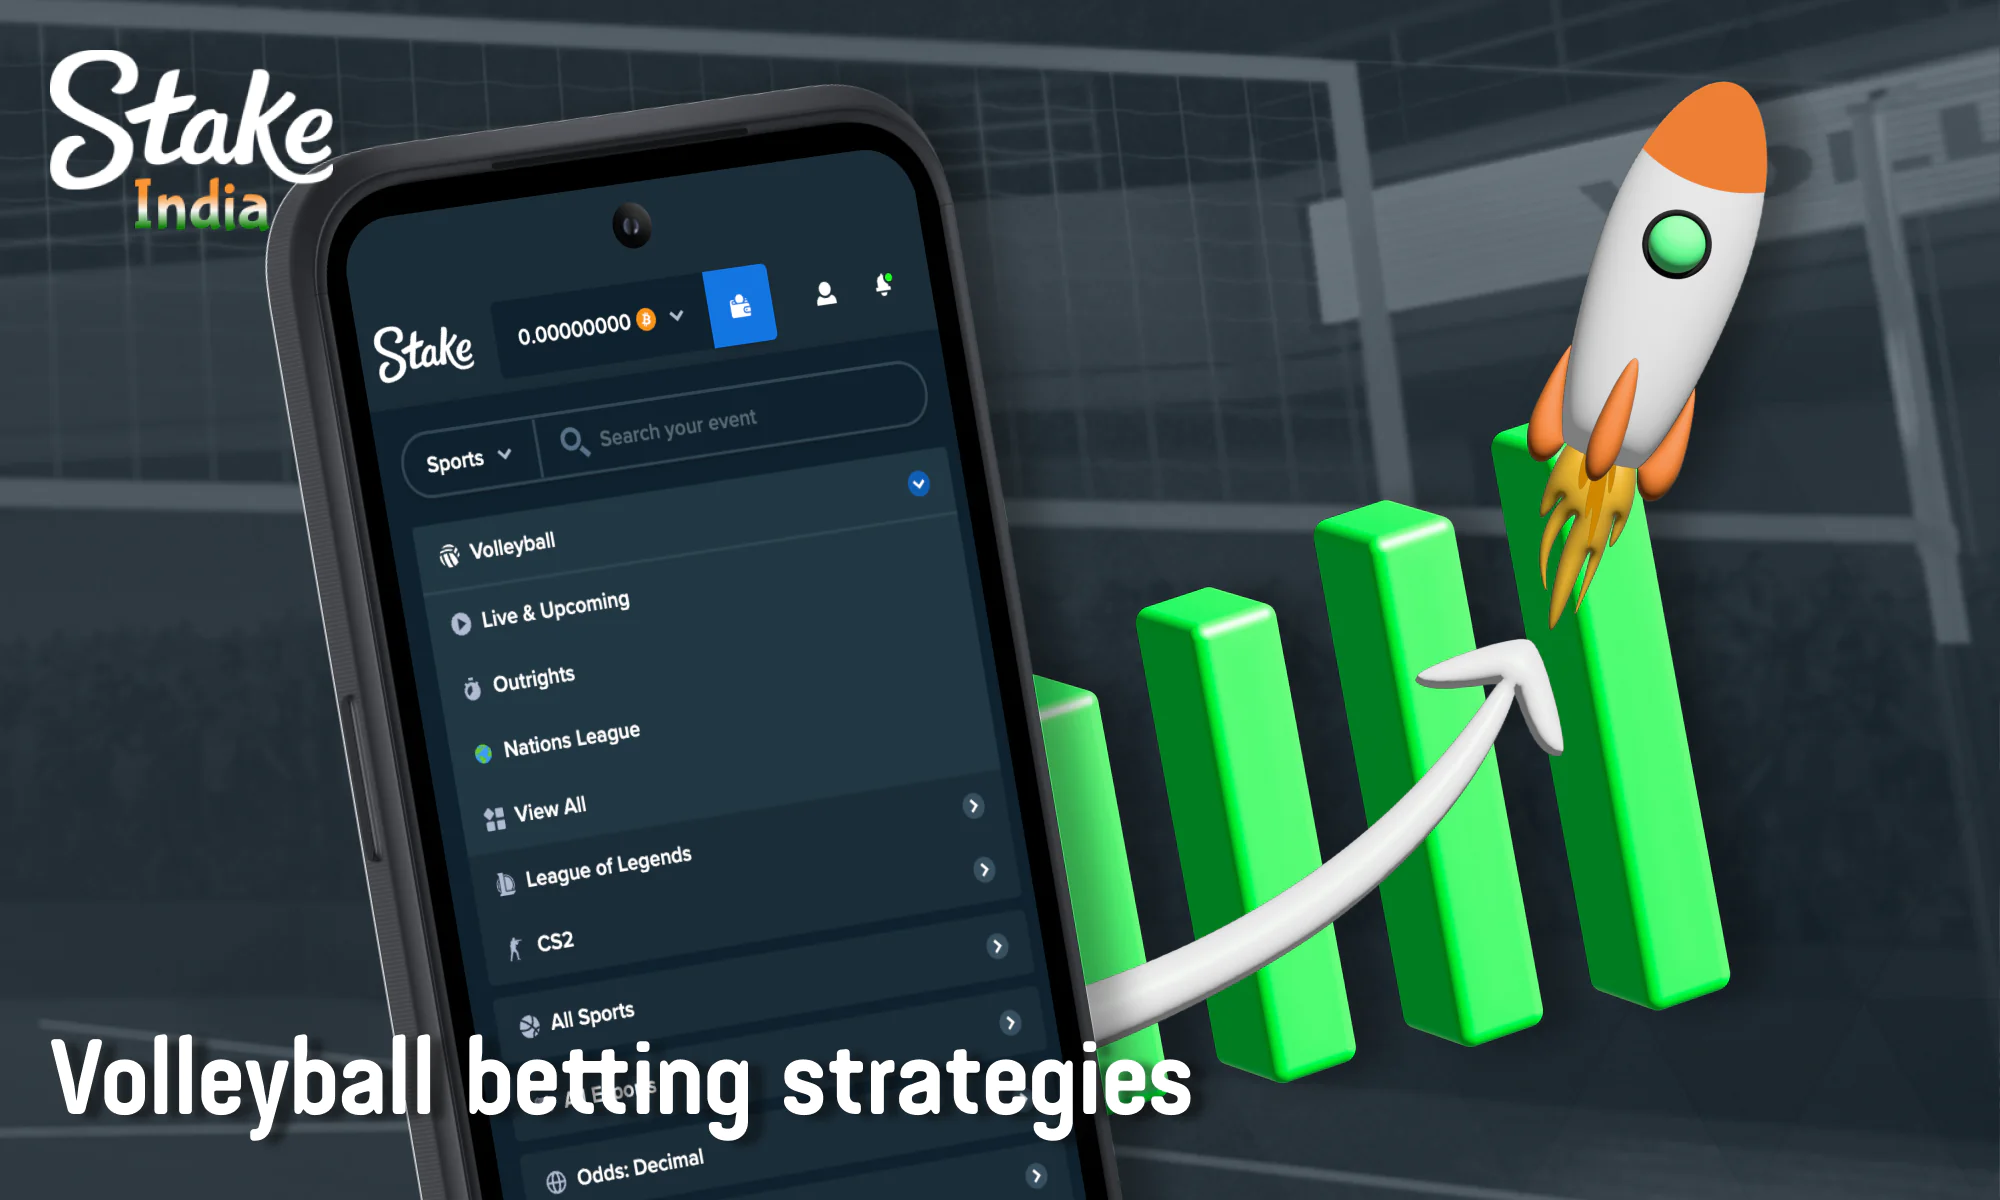 Strategies for volleyball betting at Stake India